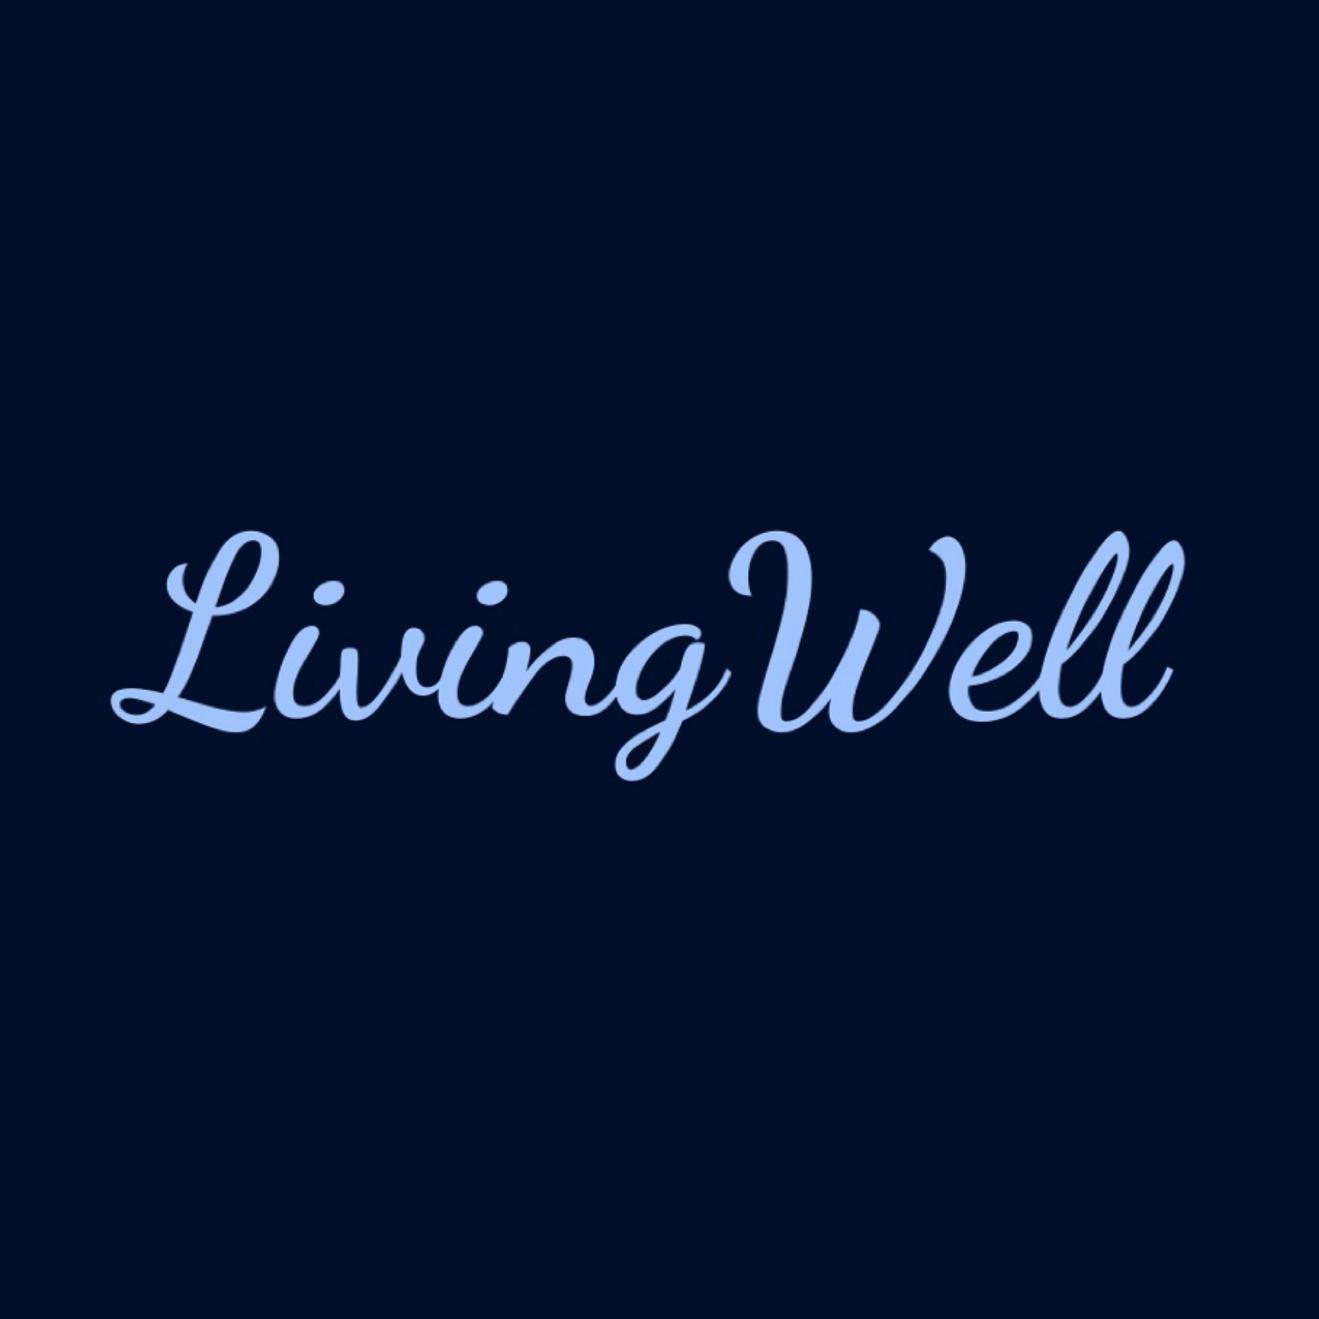 LivingWell's images